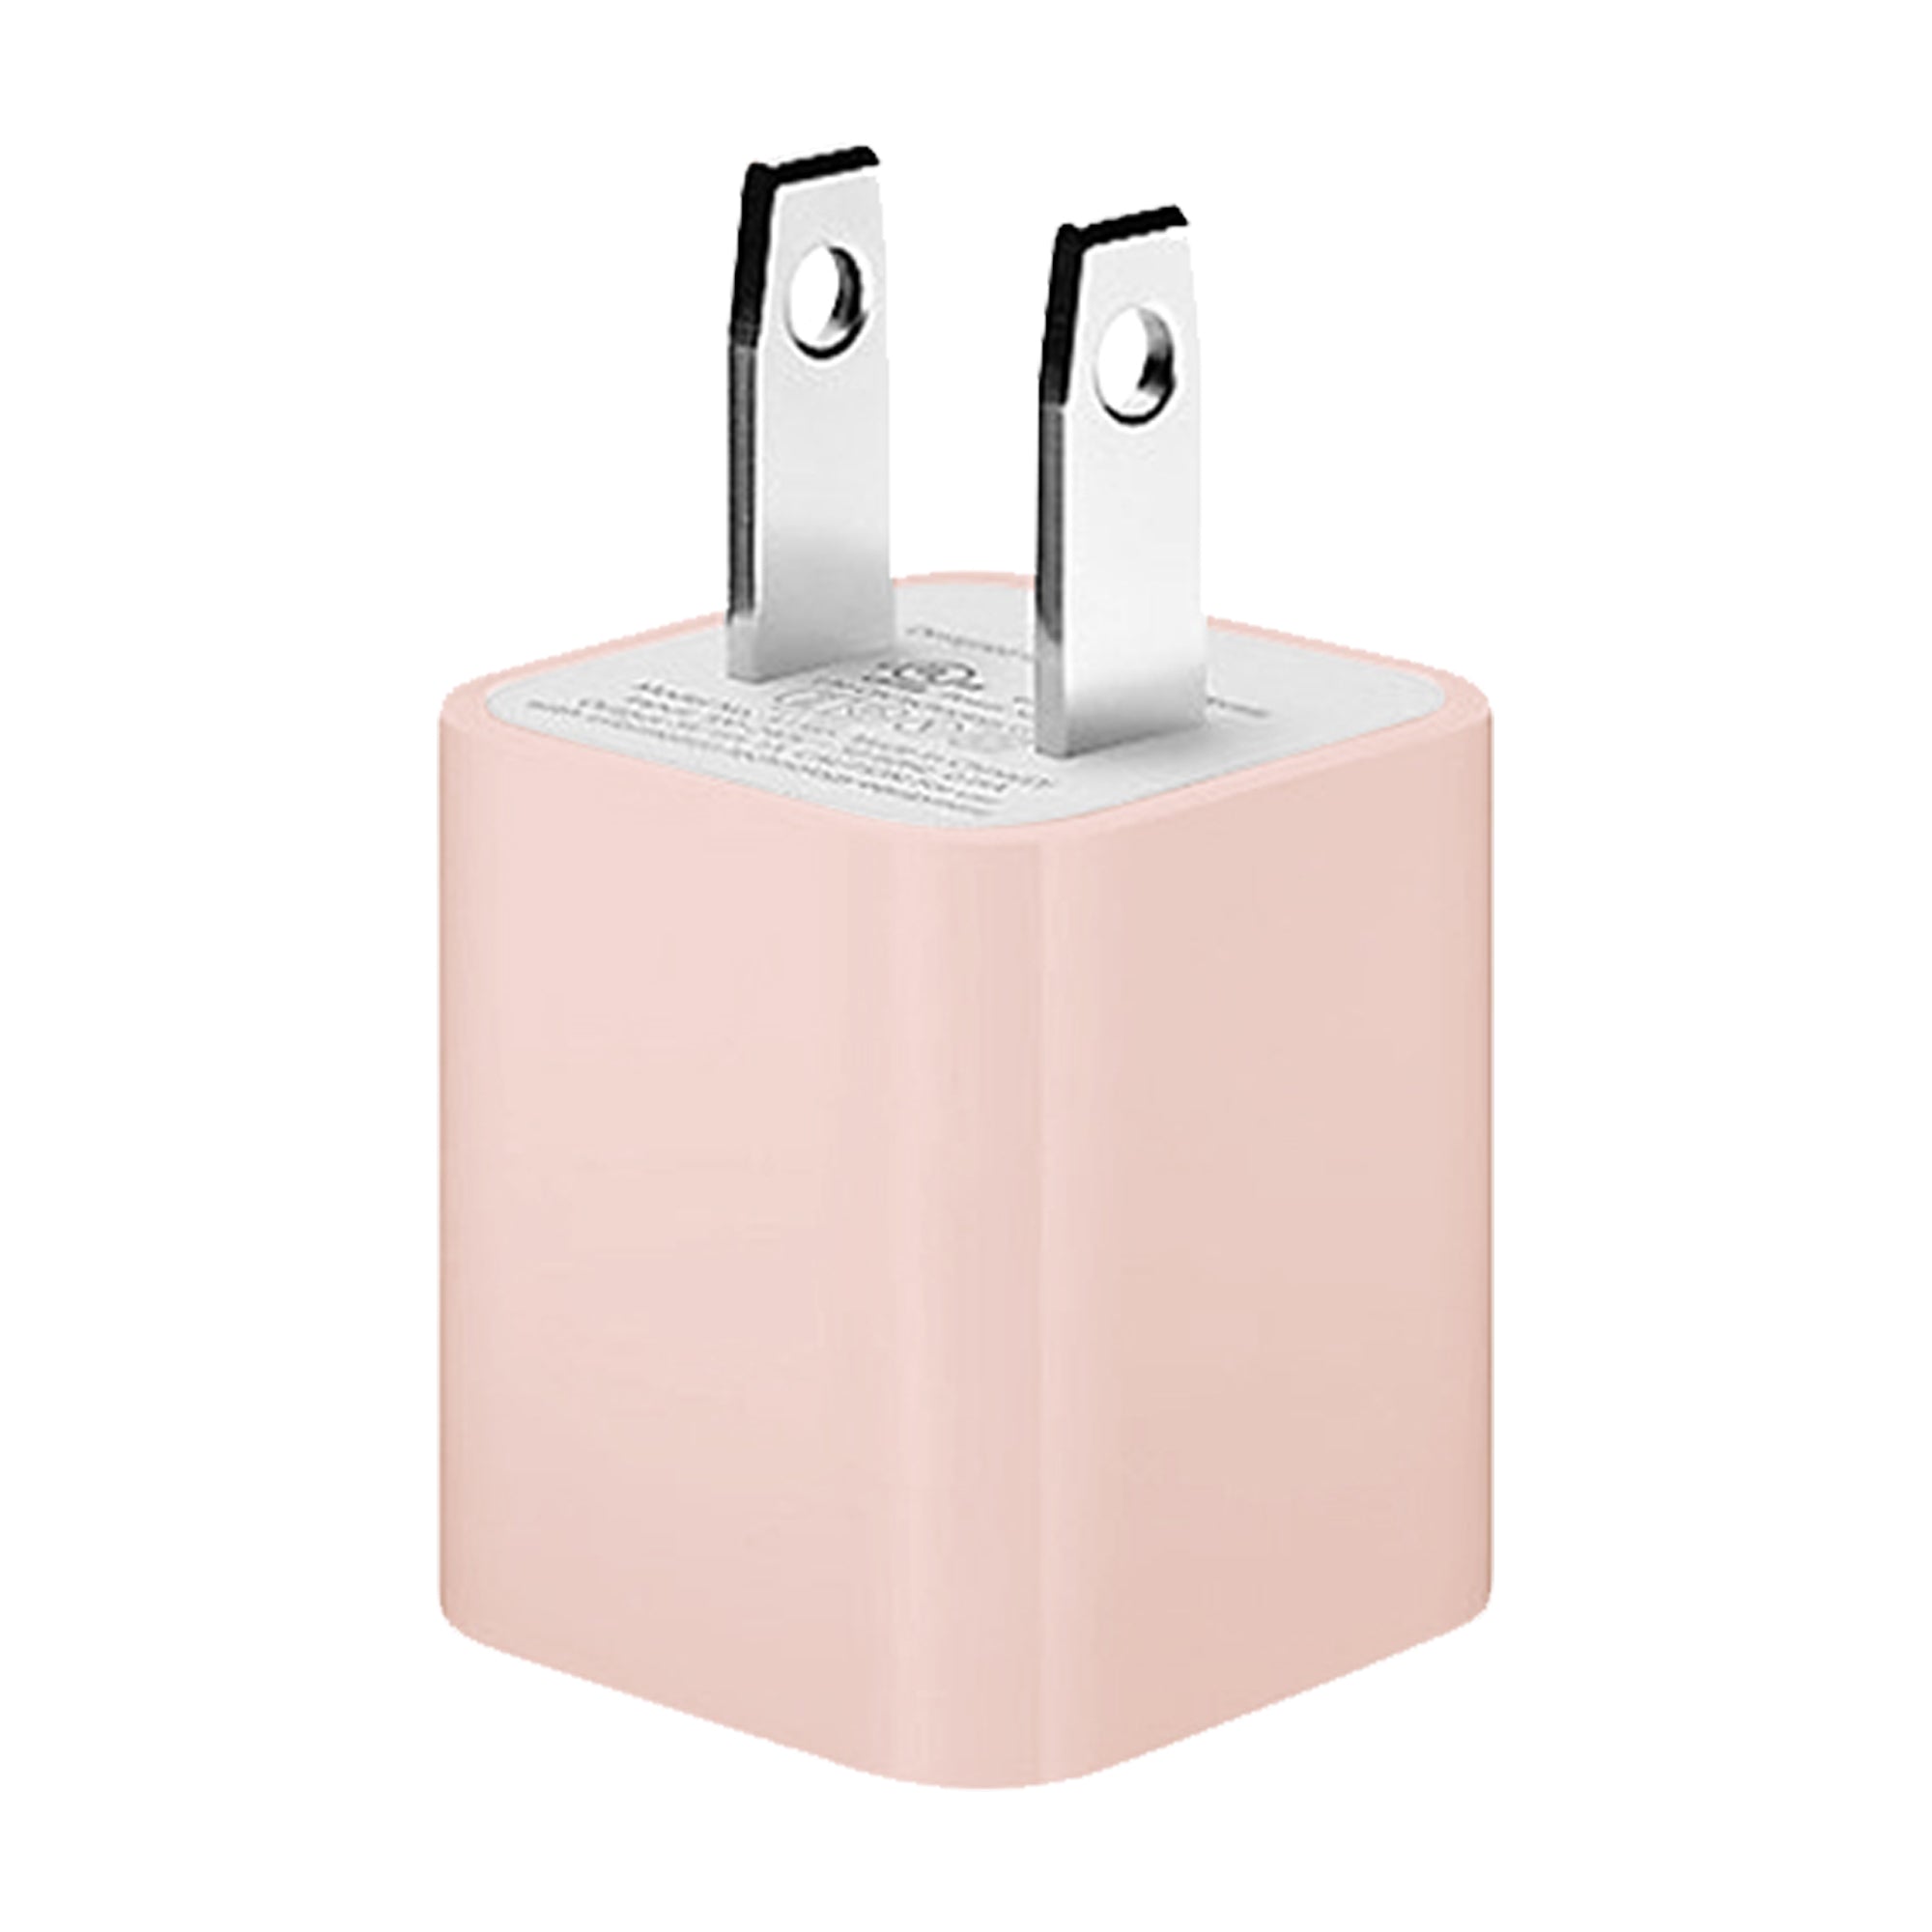 iTouch Charging Cube: Pink affordable charger